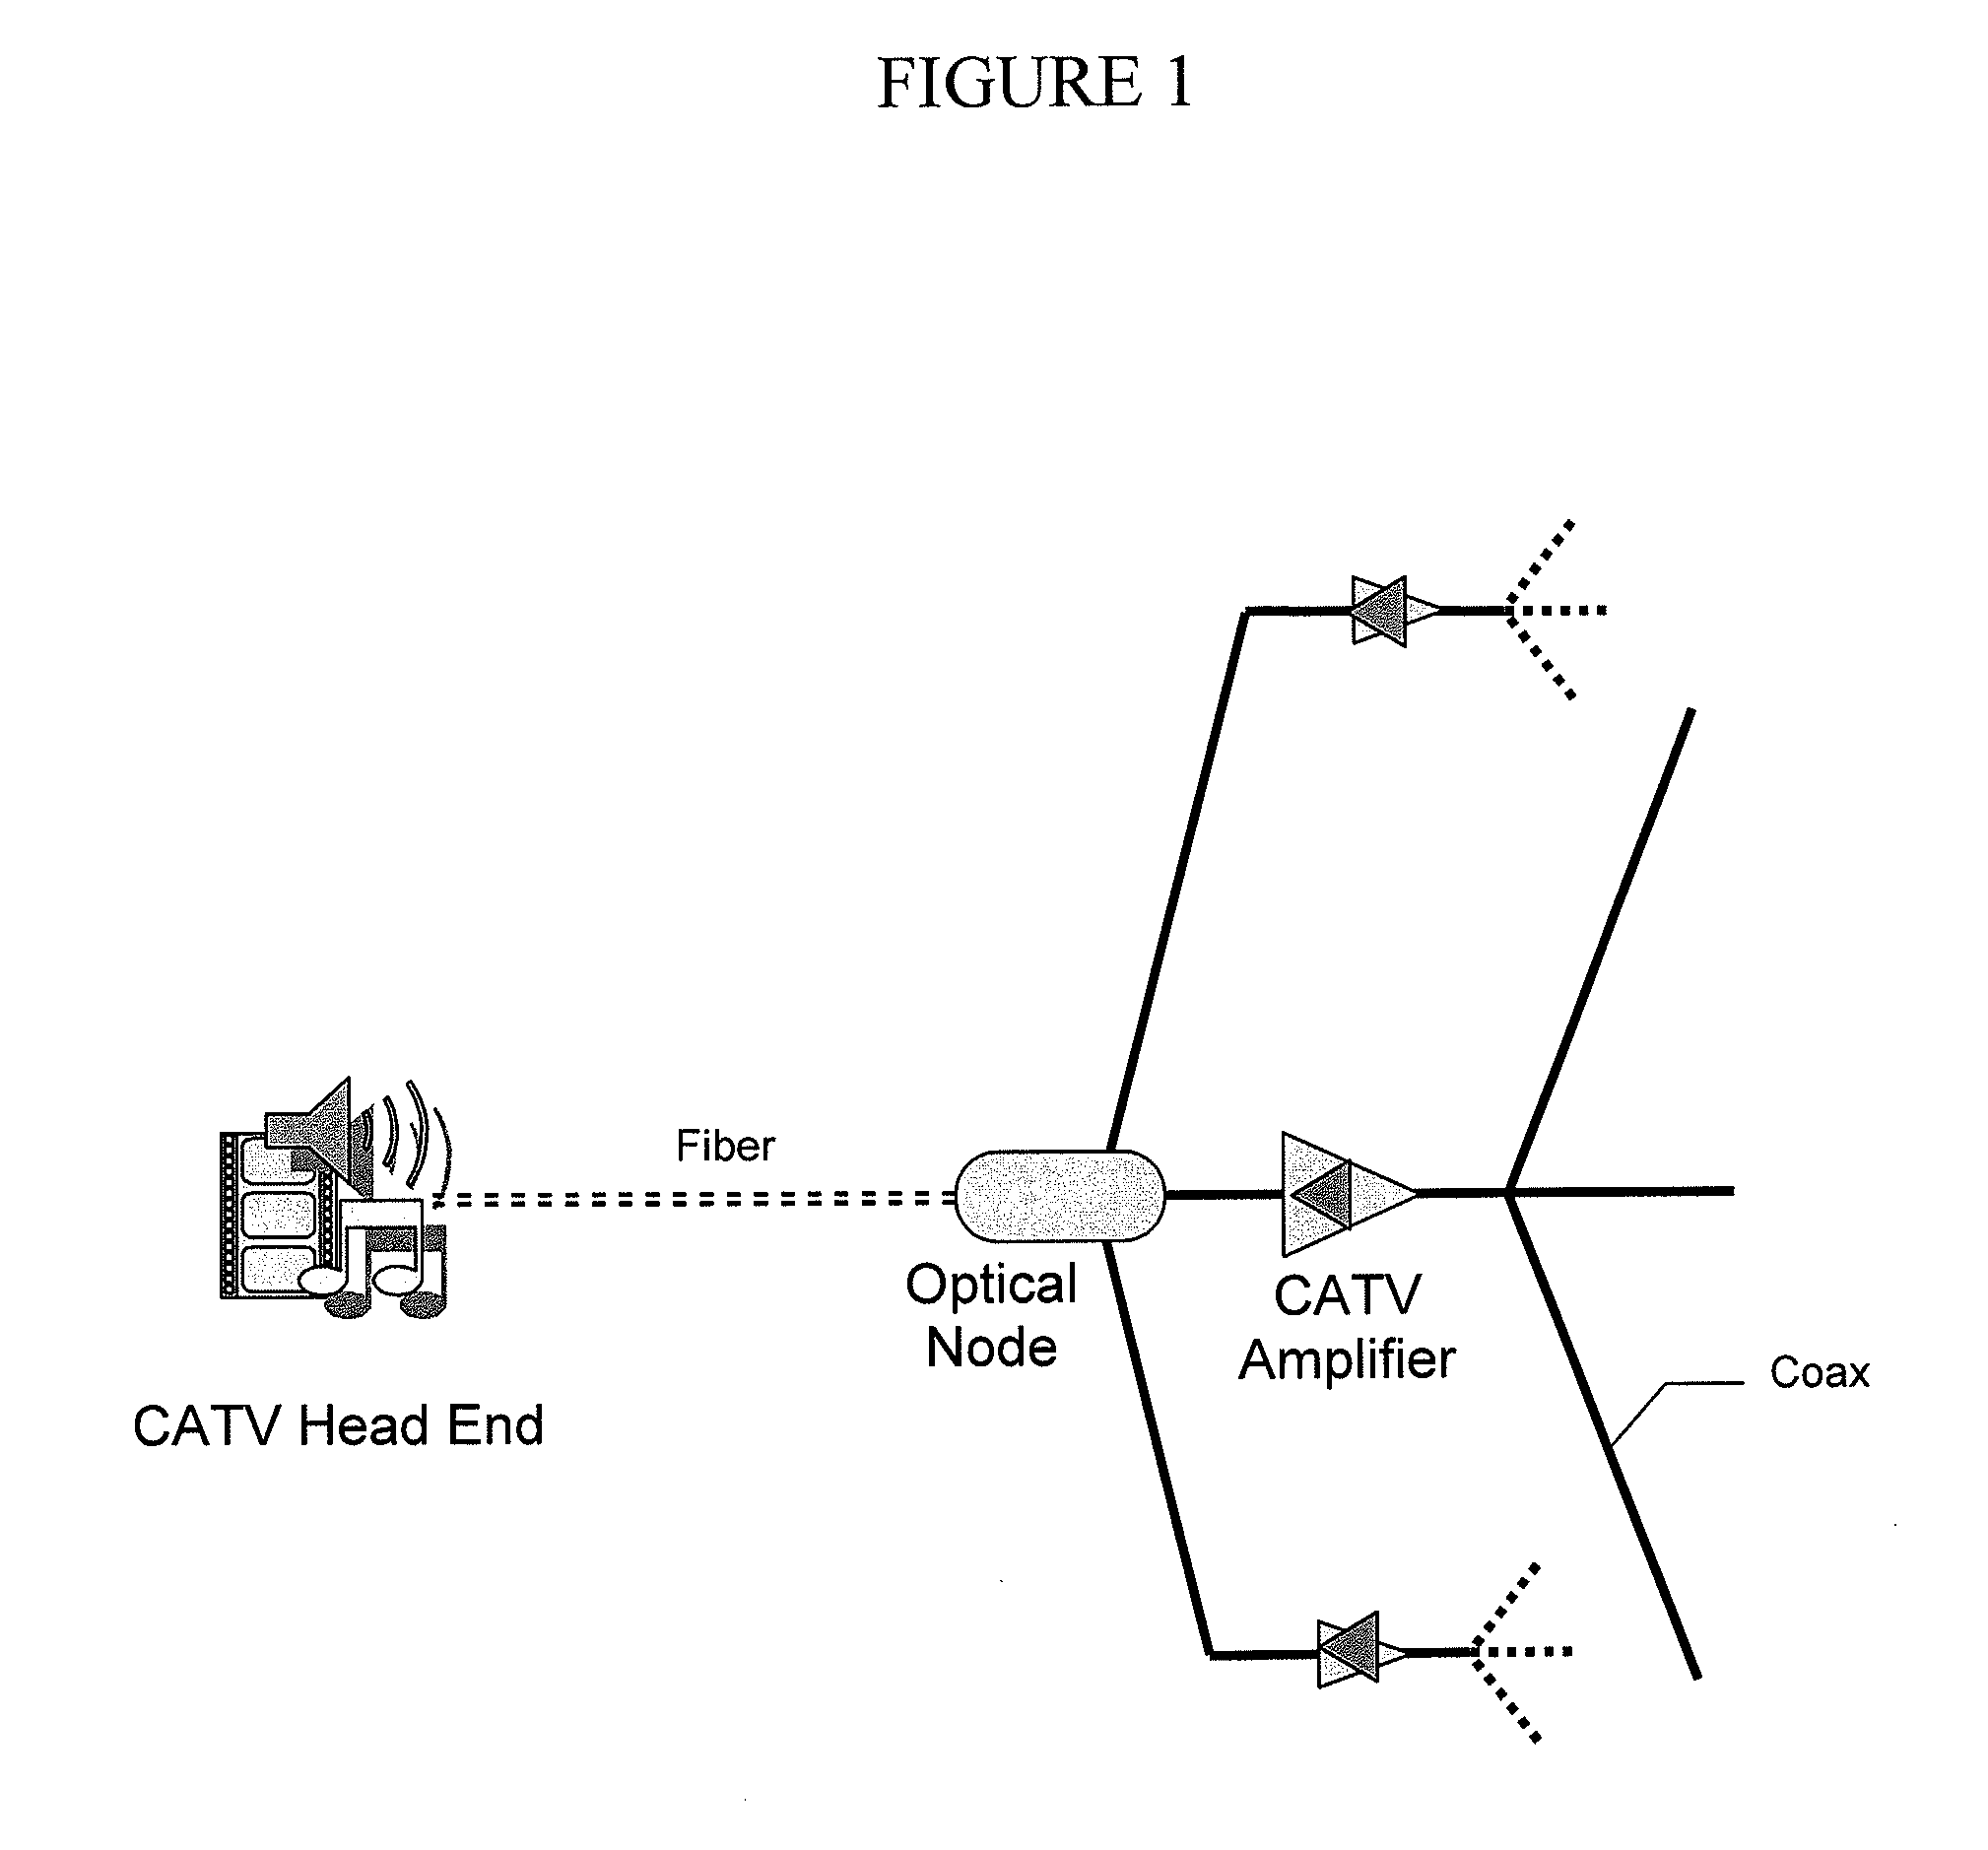 Method and apparatus for providing wireless signals over catv, dbs, PON infrastructure